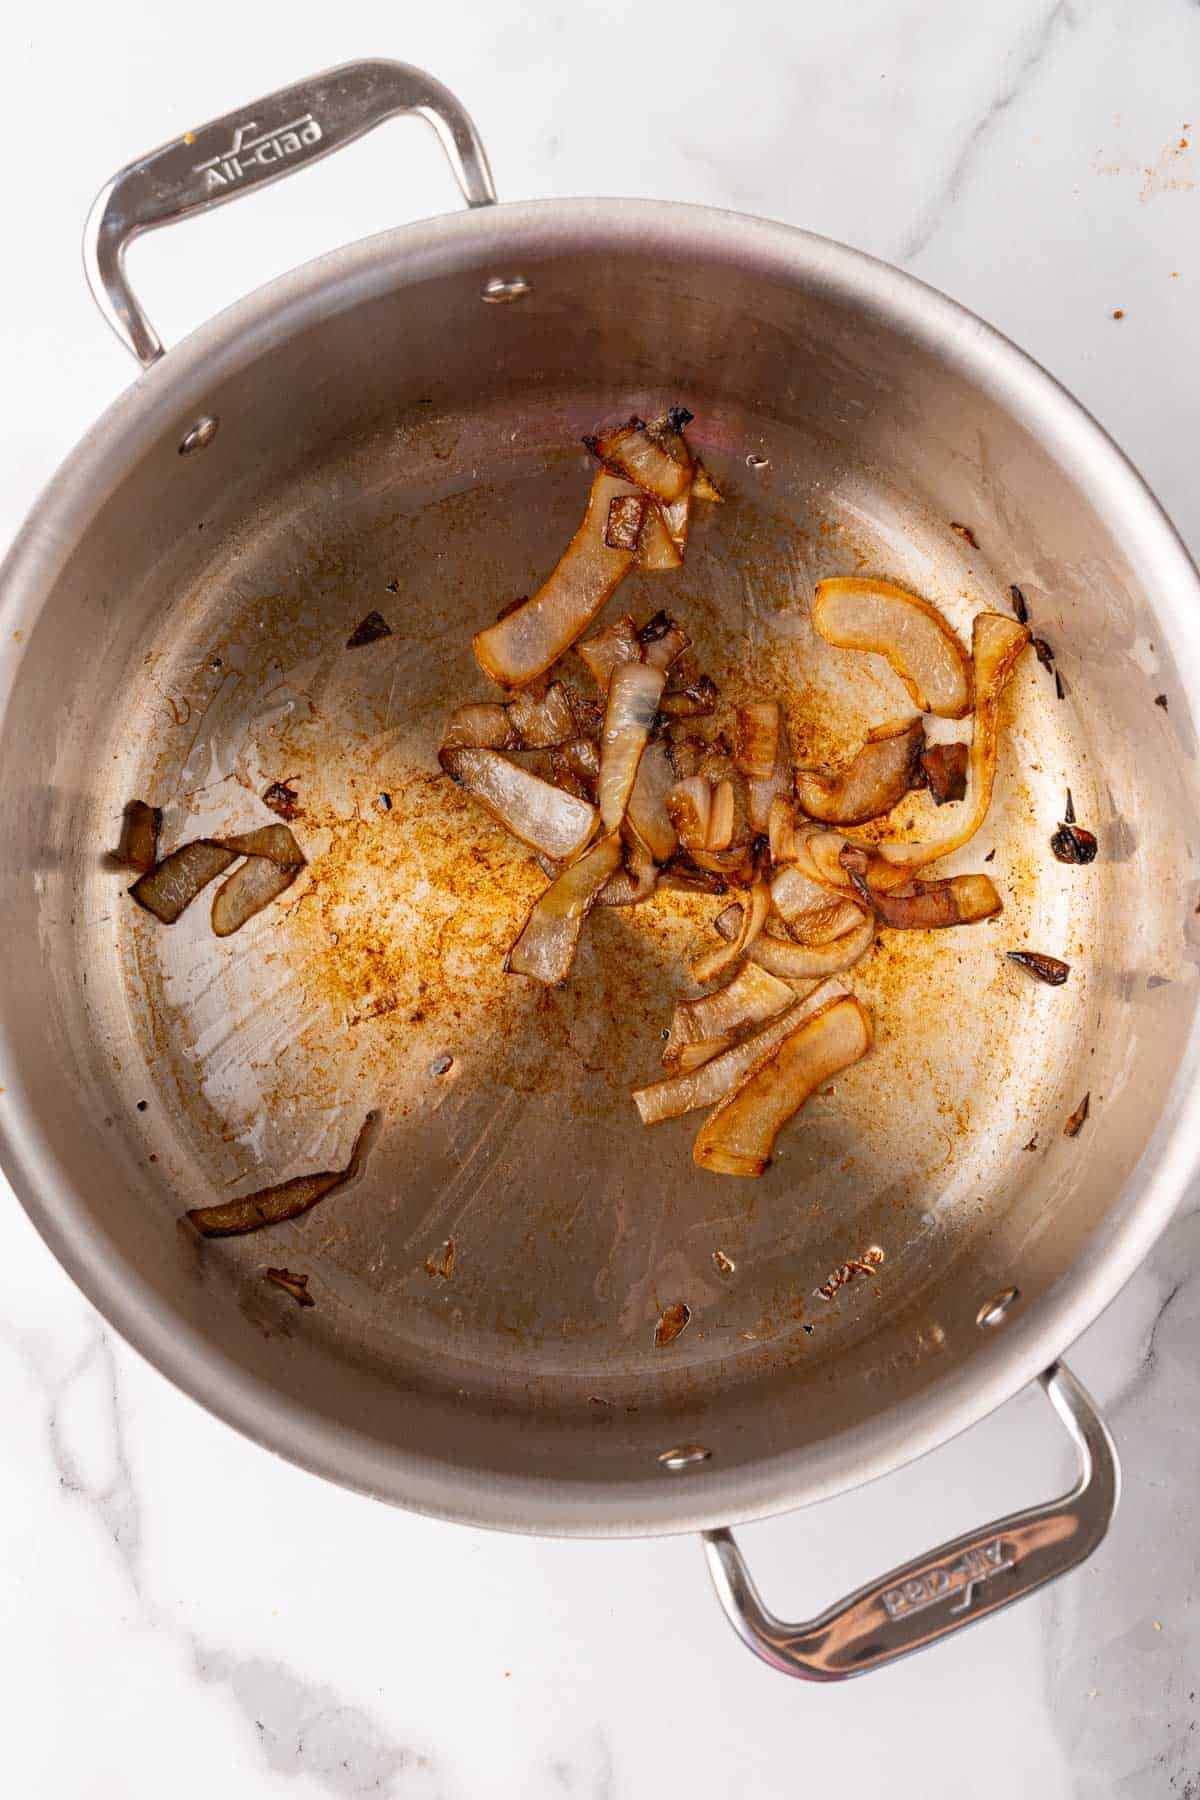 Onions caramelized in a silver saucepan, as seen from above on a white marble countertop